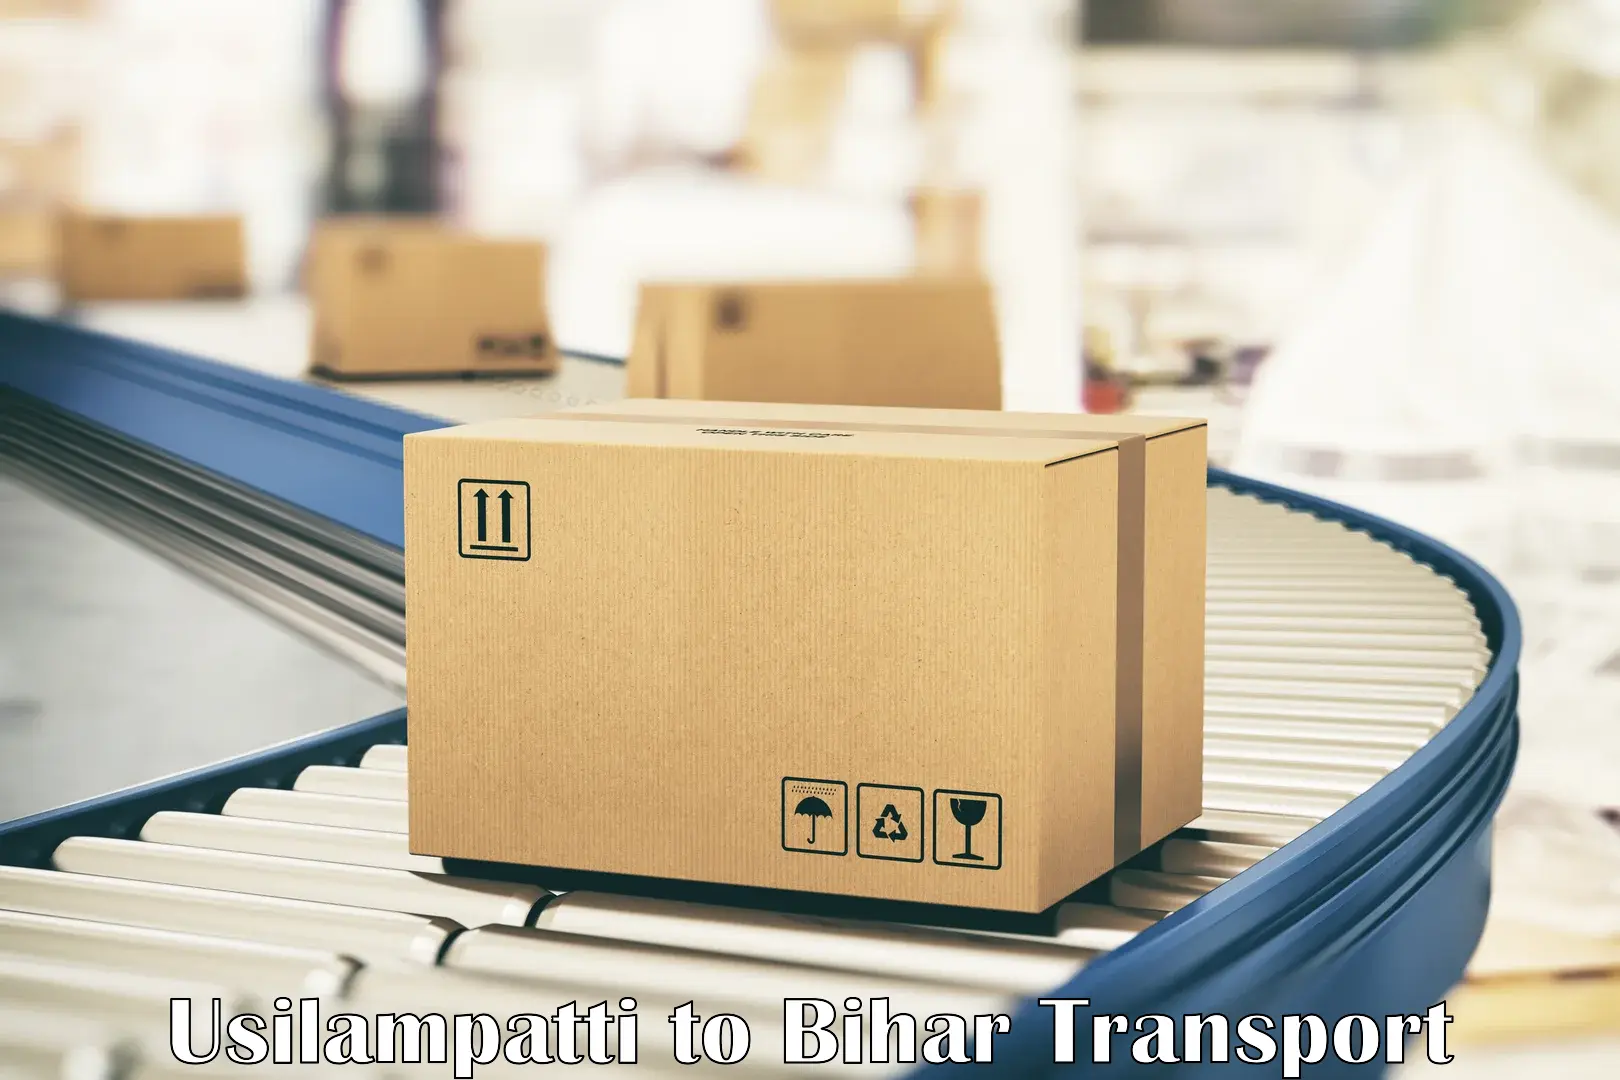 Express transport services in Usilampatti to Dhaka